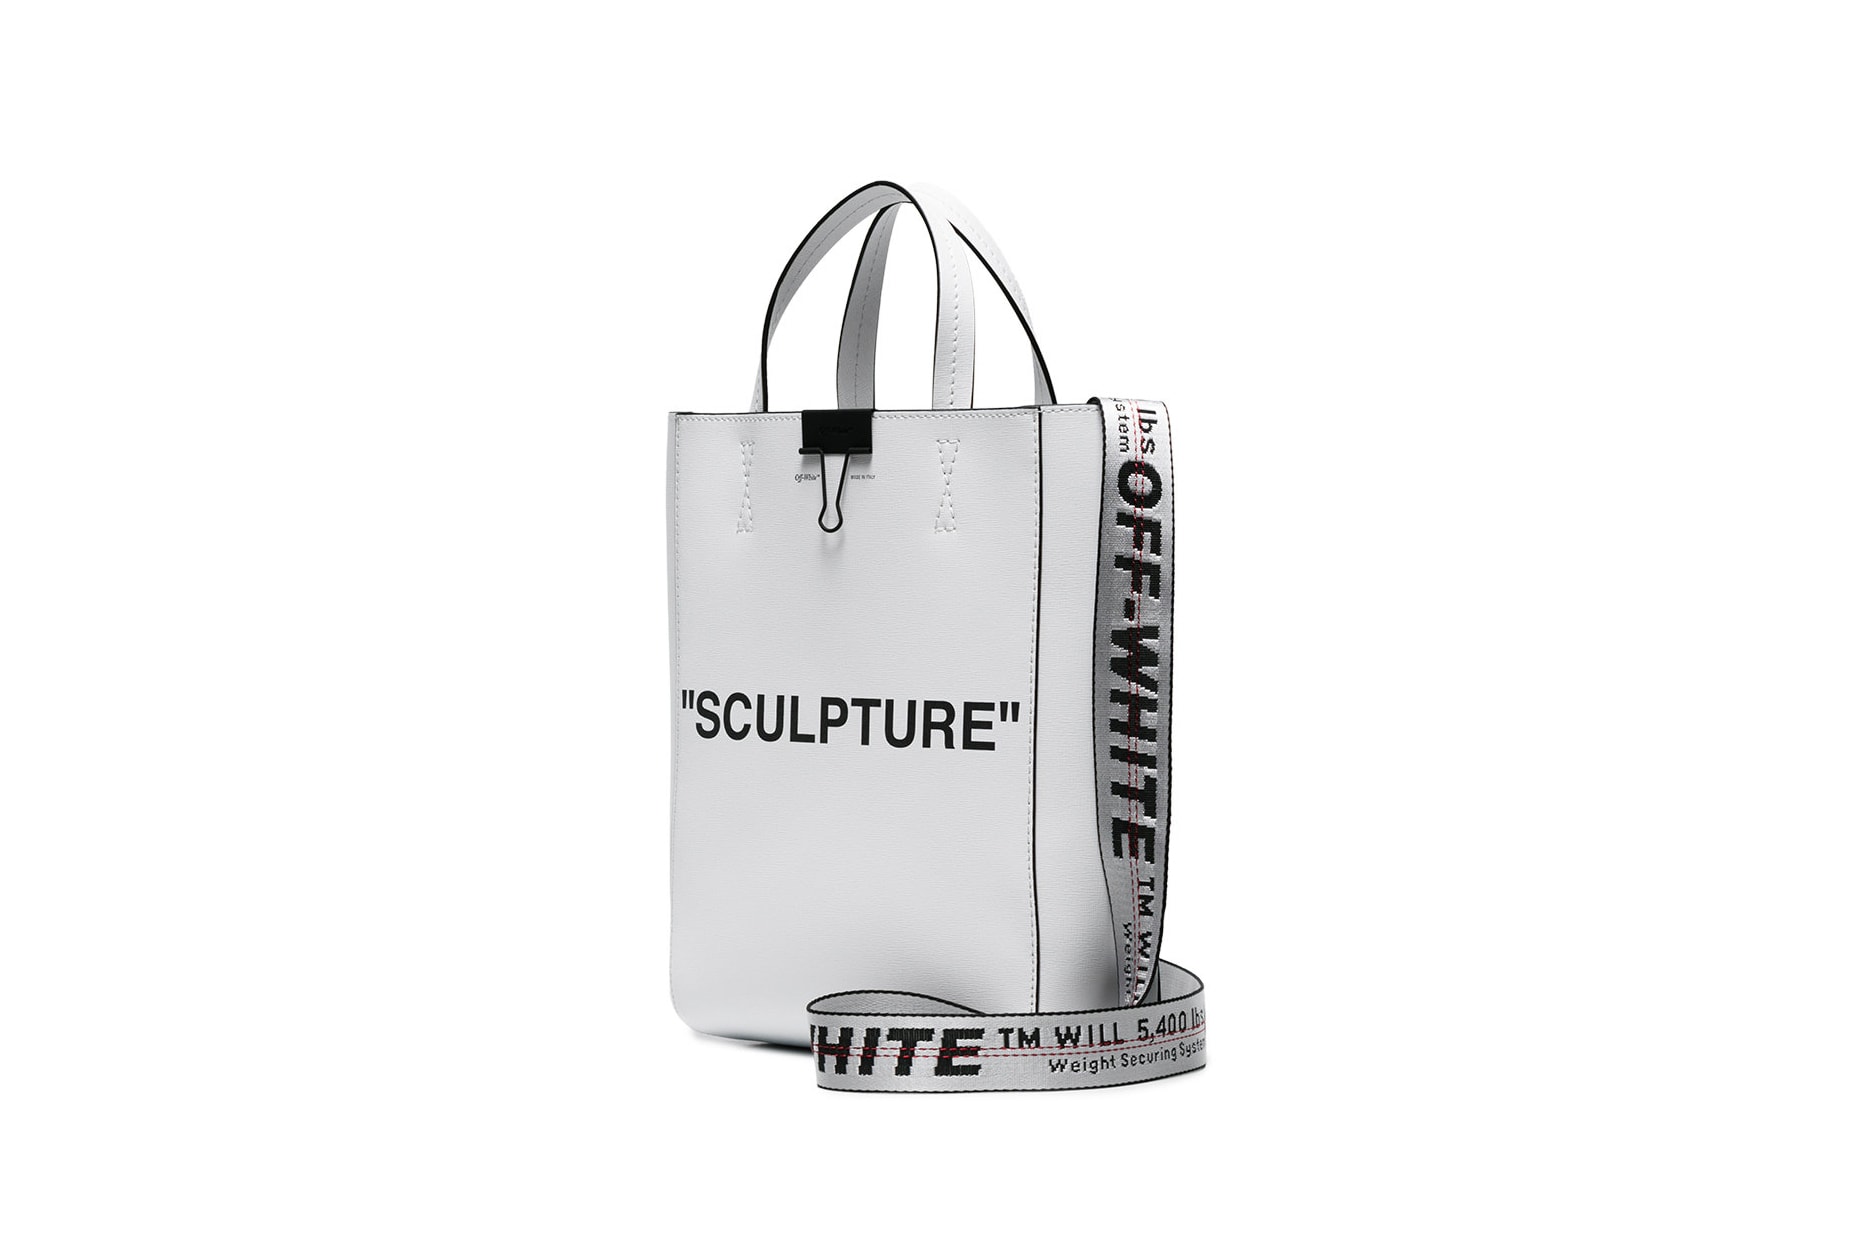 Off-White™ Sculpture Tote Bag White Colorway Industrial Strap Leather Bag Virgil Abloh